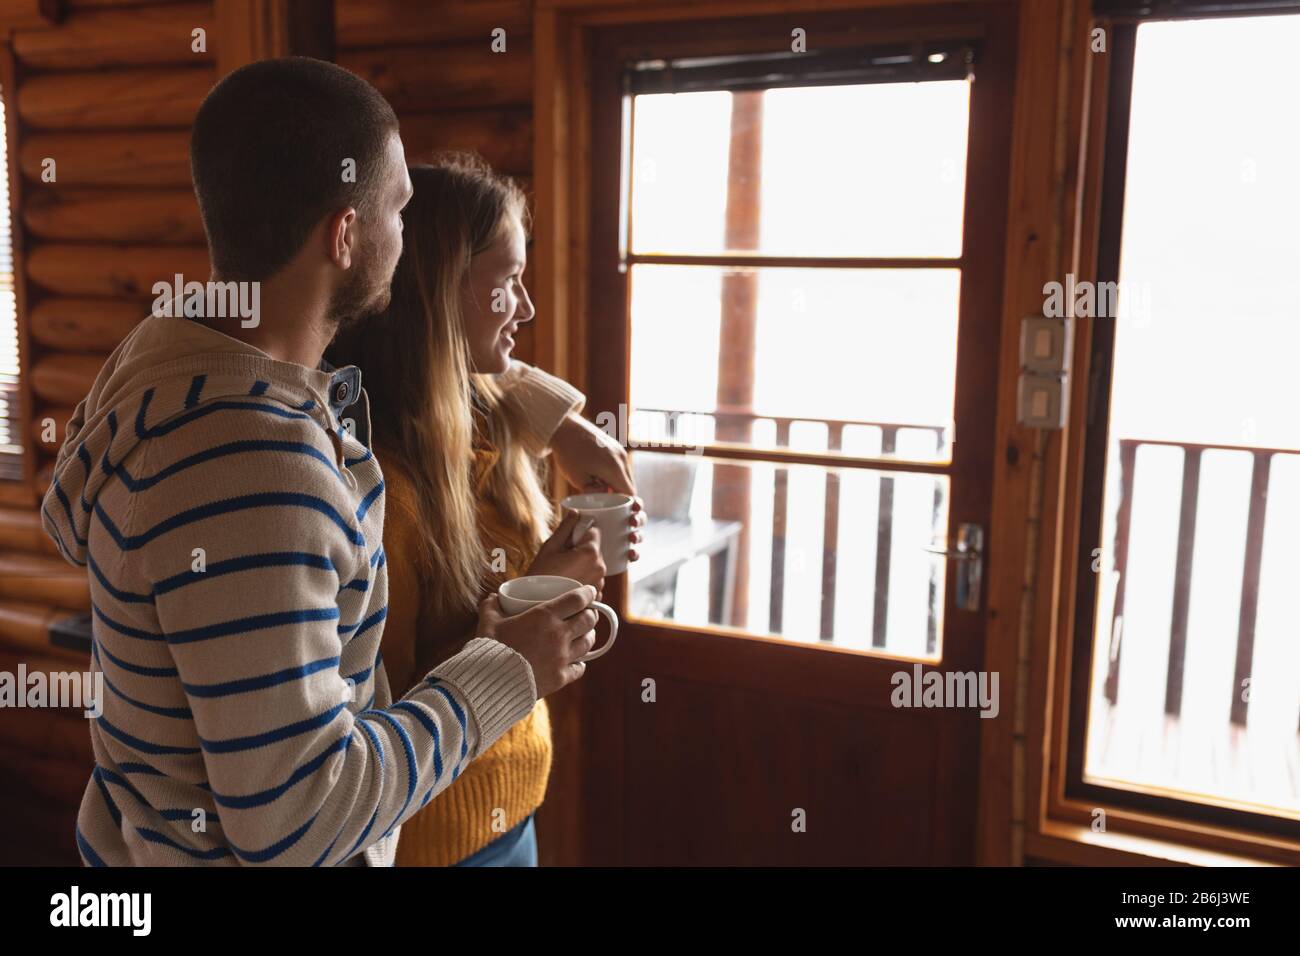 Caucasian couple watching outdoors view and holding a mug Stock Photo